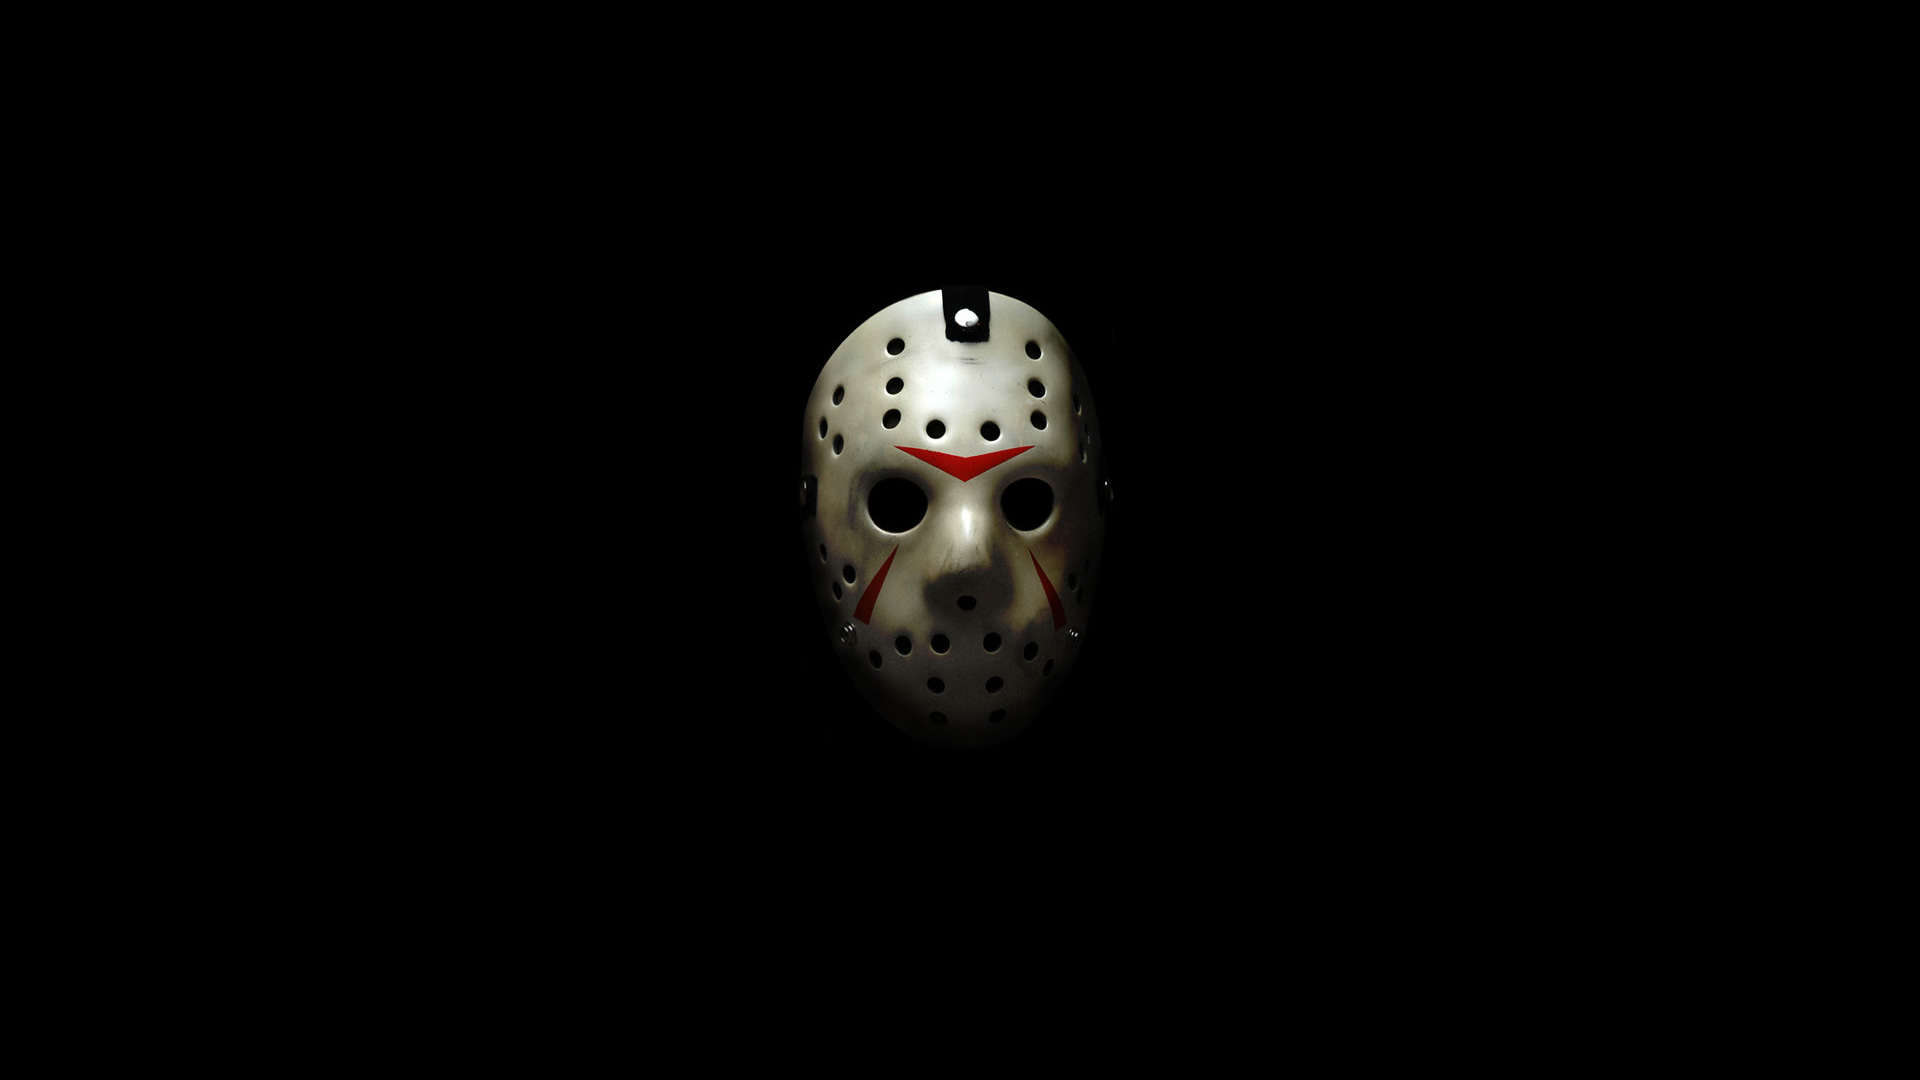 Happy Friday The 13th Wallpaper